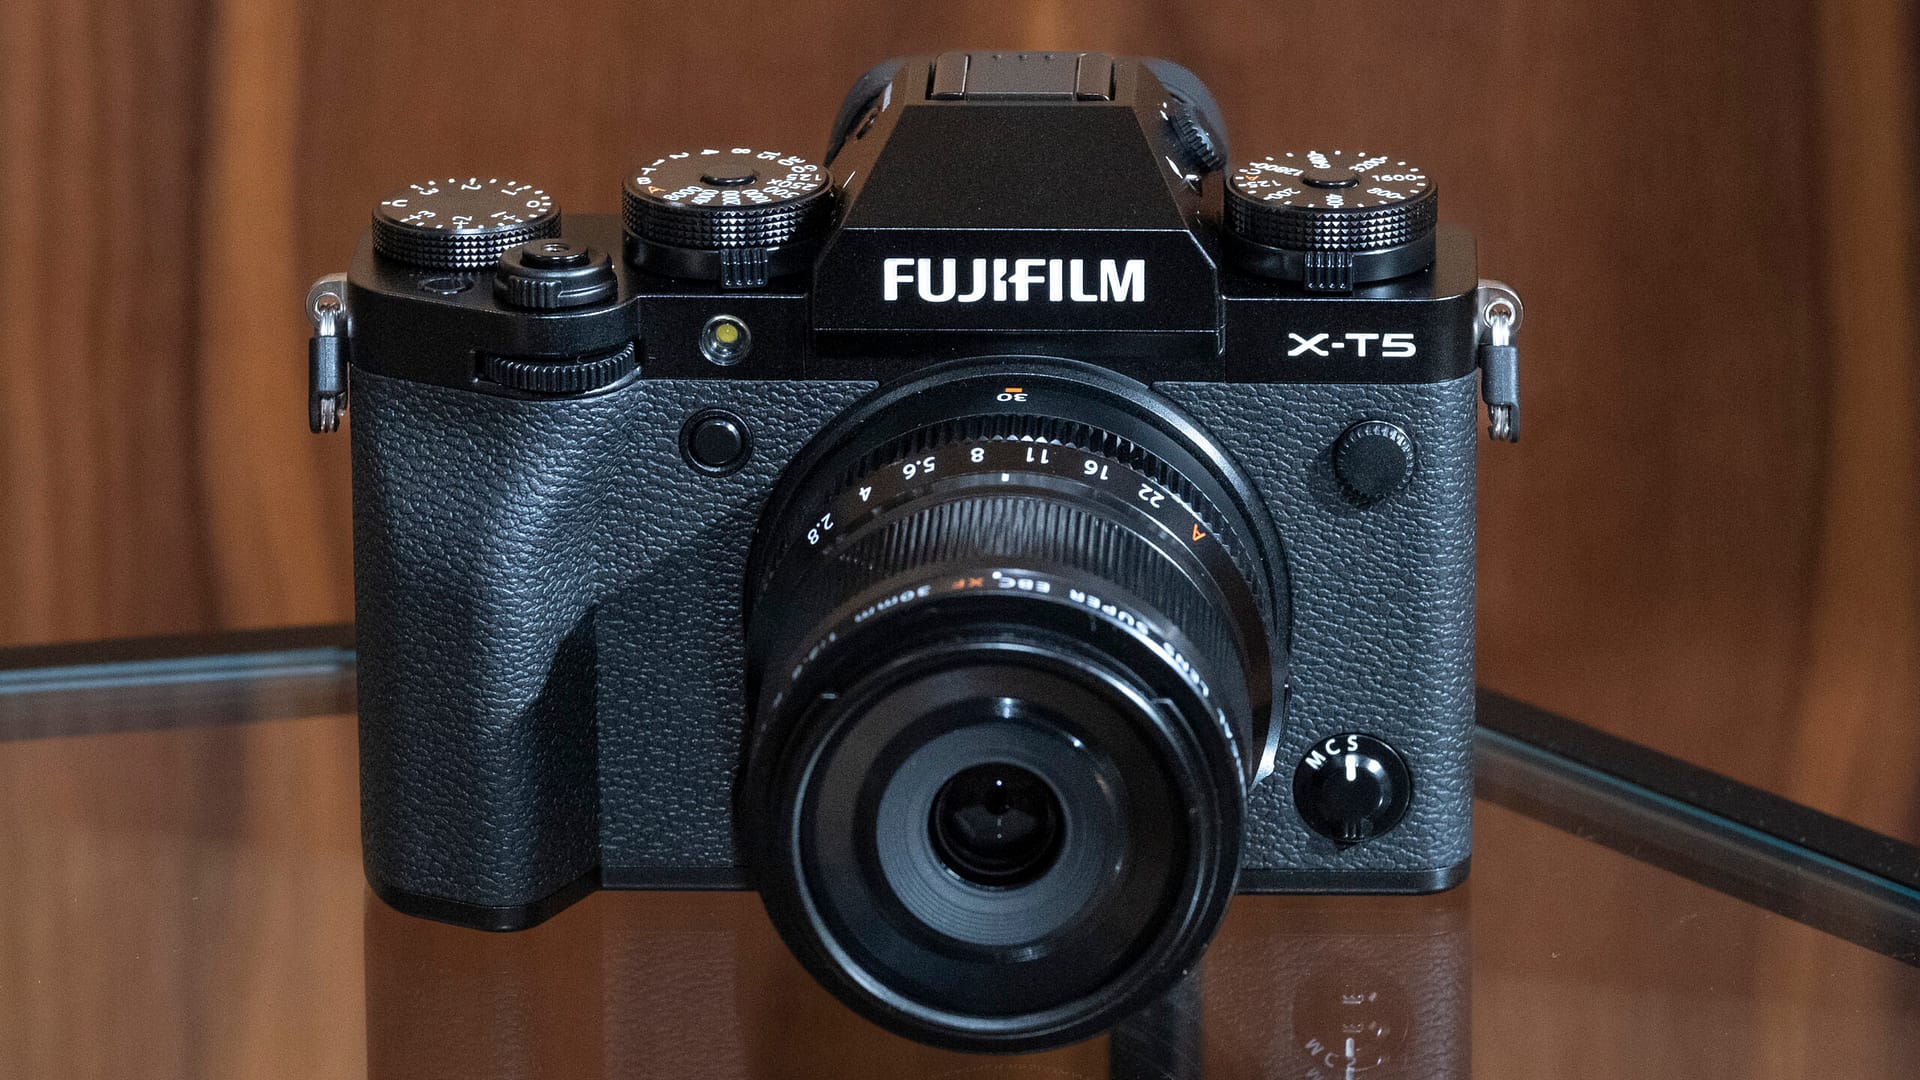 Fujifilm X-T5 Camera Review with XF18-55mm Lens Kit